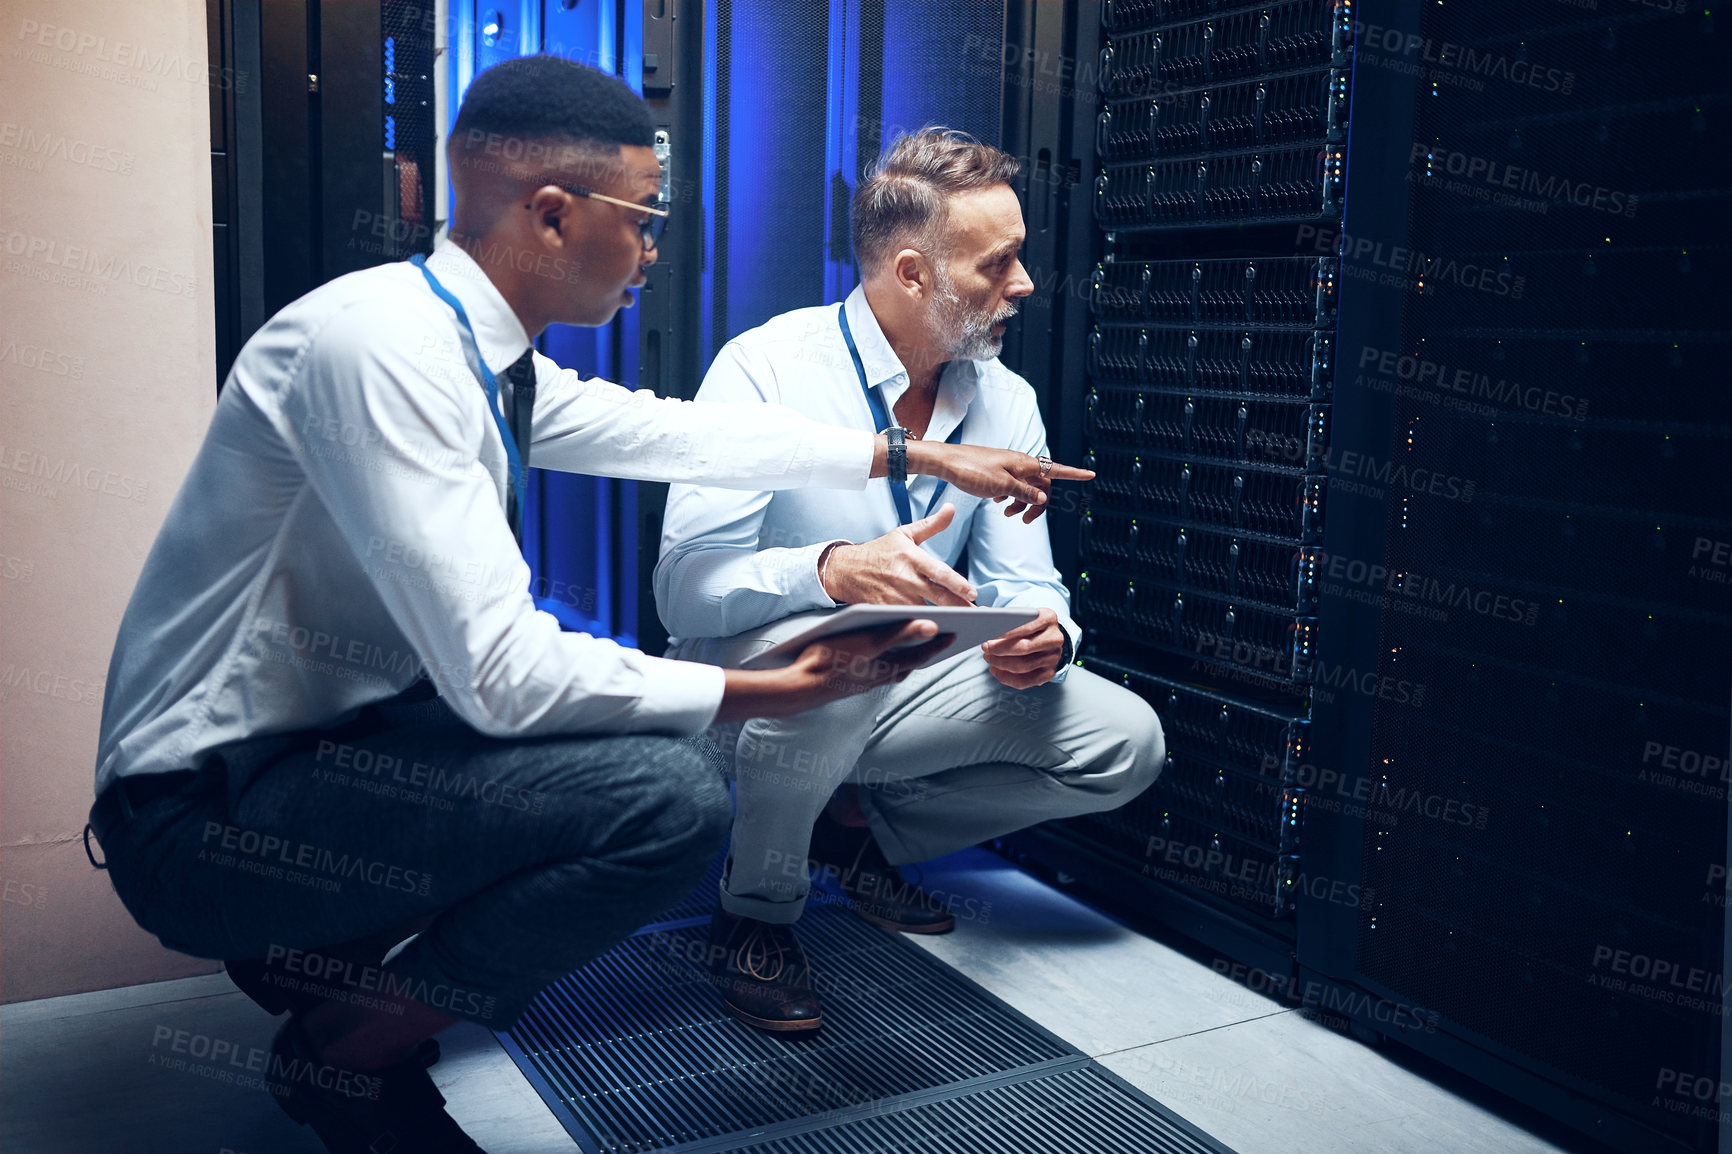 Buy stock photo Shot of two technicians using a digital tablet while working in a server room